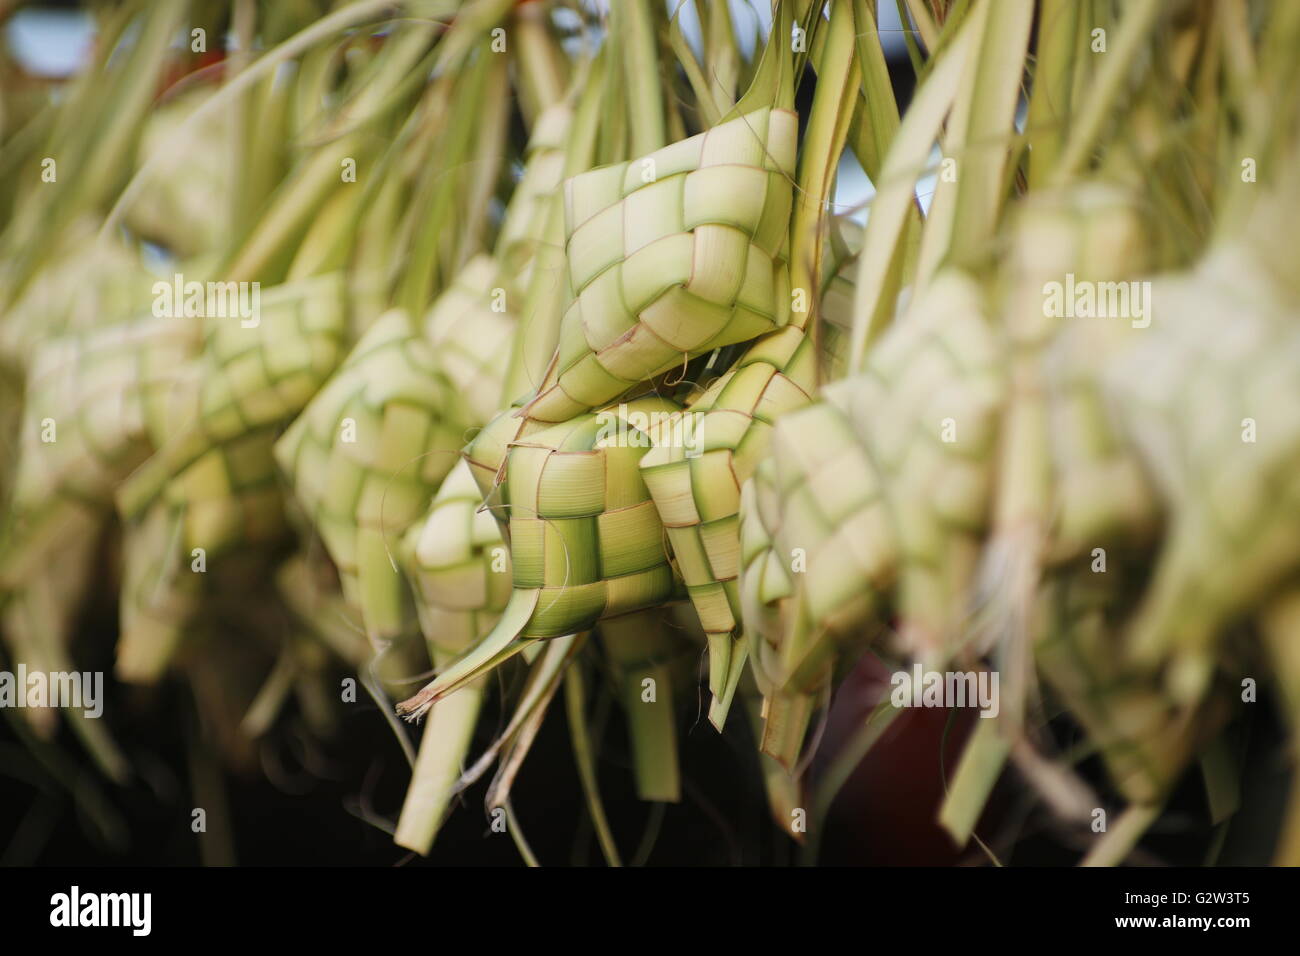 Ketupat, a type of dumpling made from rice packed inside a diamond-shaped container of woven palm leaf pouch. Stock Photo